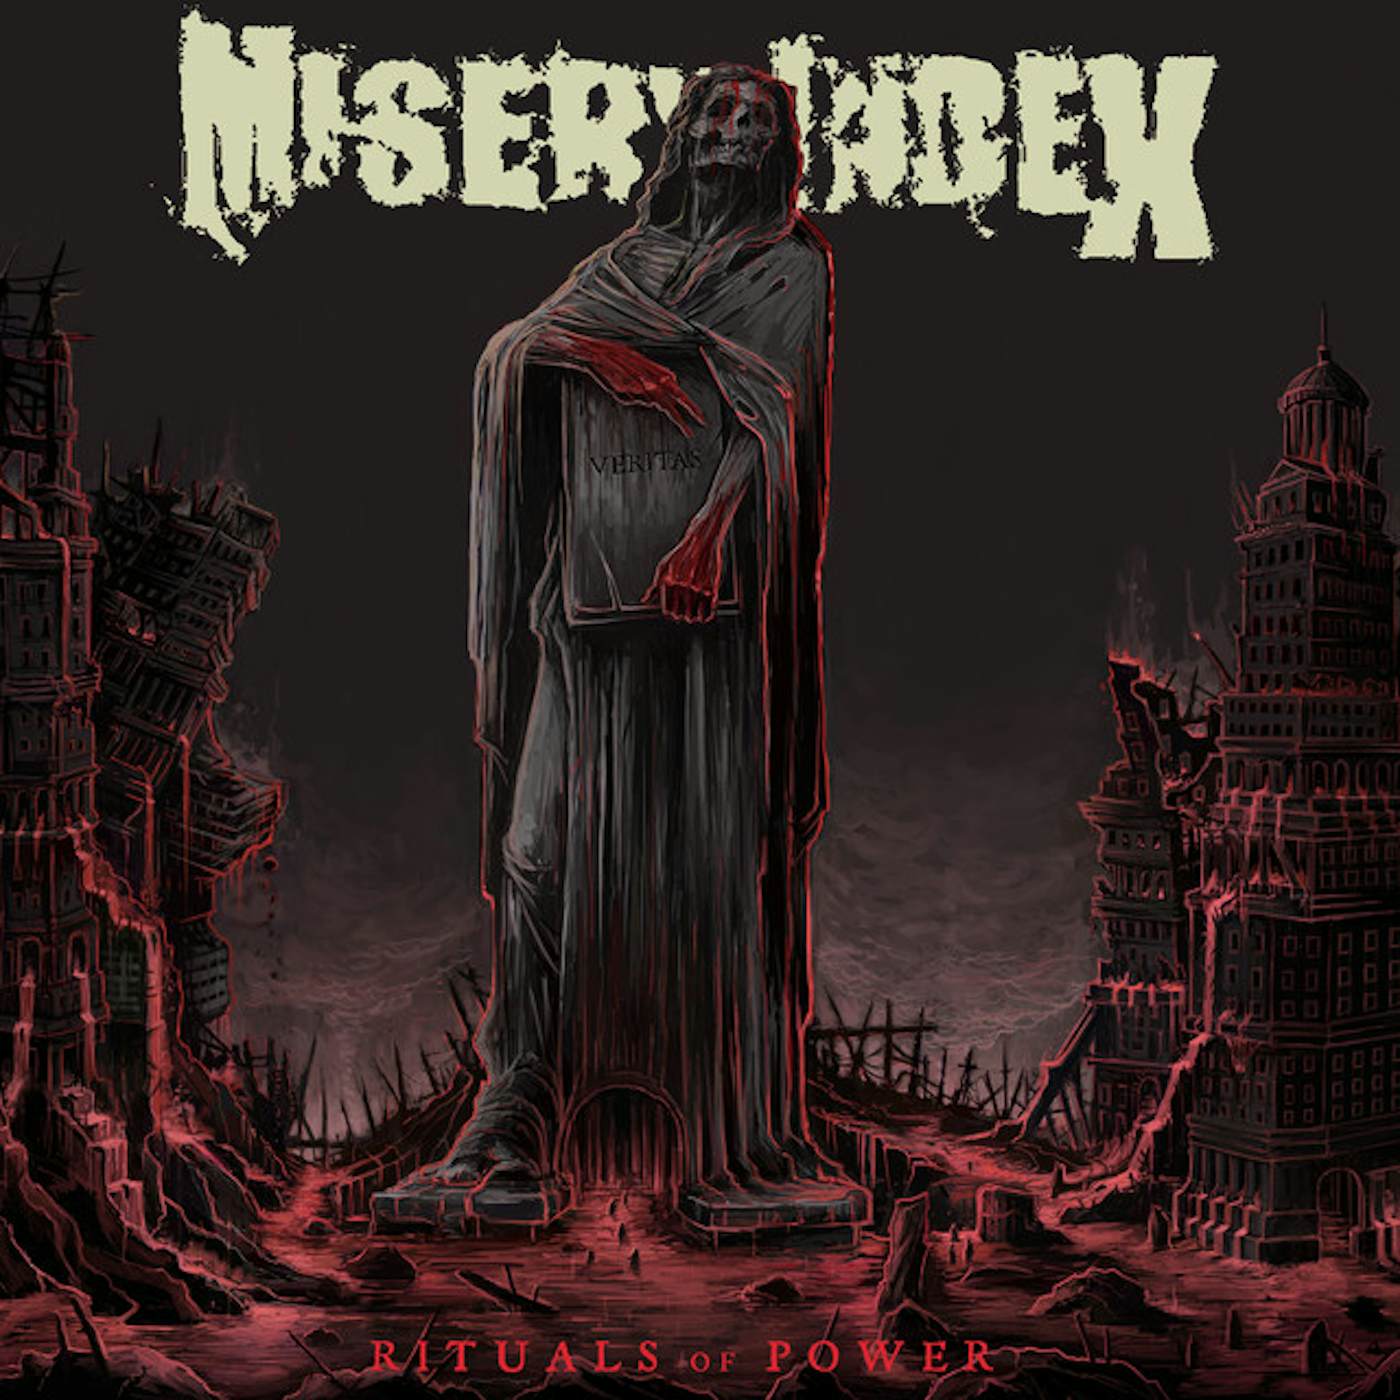 Misery Index Rituals of Power Vinyl Record